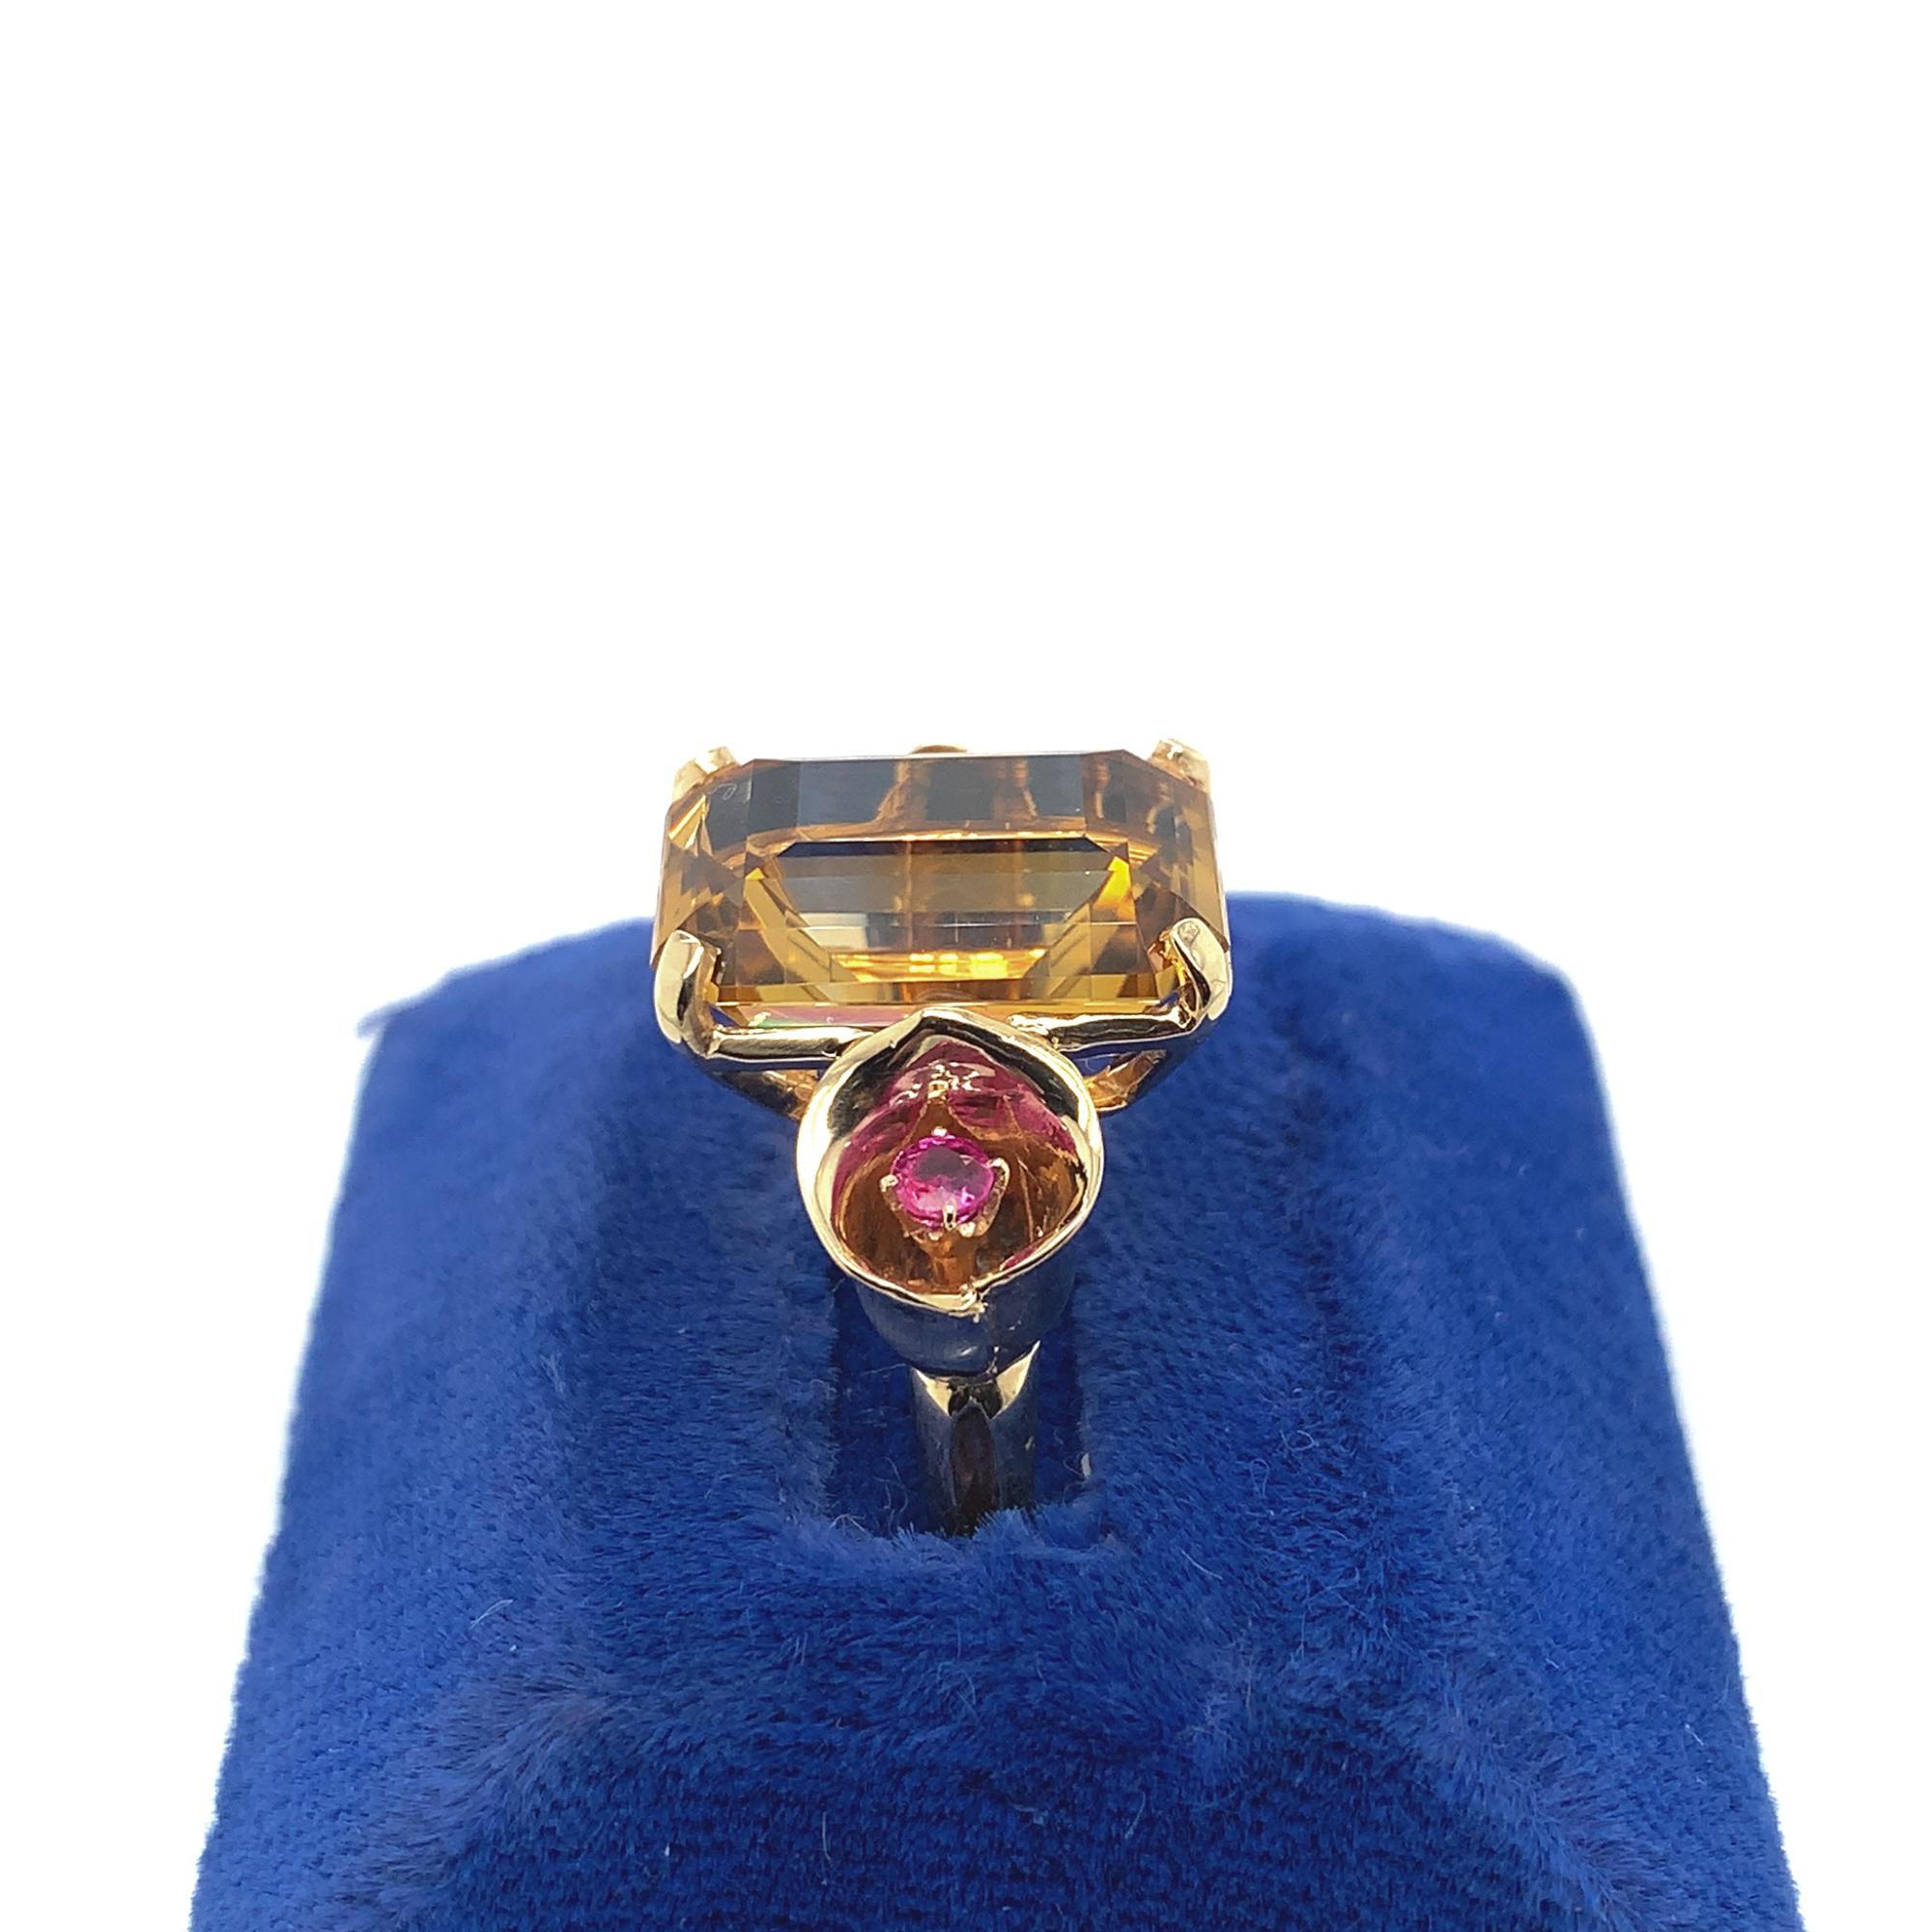 14K rosy yellow gold Retro ring featuring a large emerald cut citrine weighing 8.55 carats. The citrine measures about 15mm x 11mm and is accented by two round ruby accents measuring about 2.5mm, set in a tulip shaped flowers. The ring fits a size 5